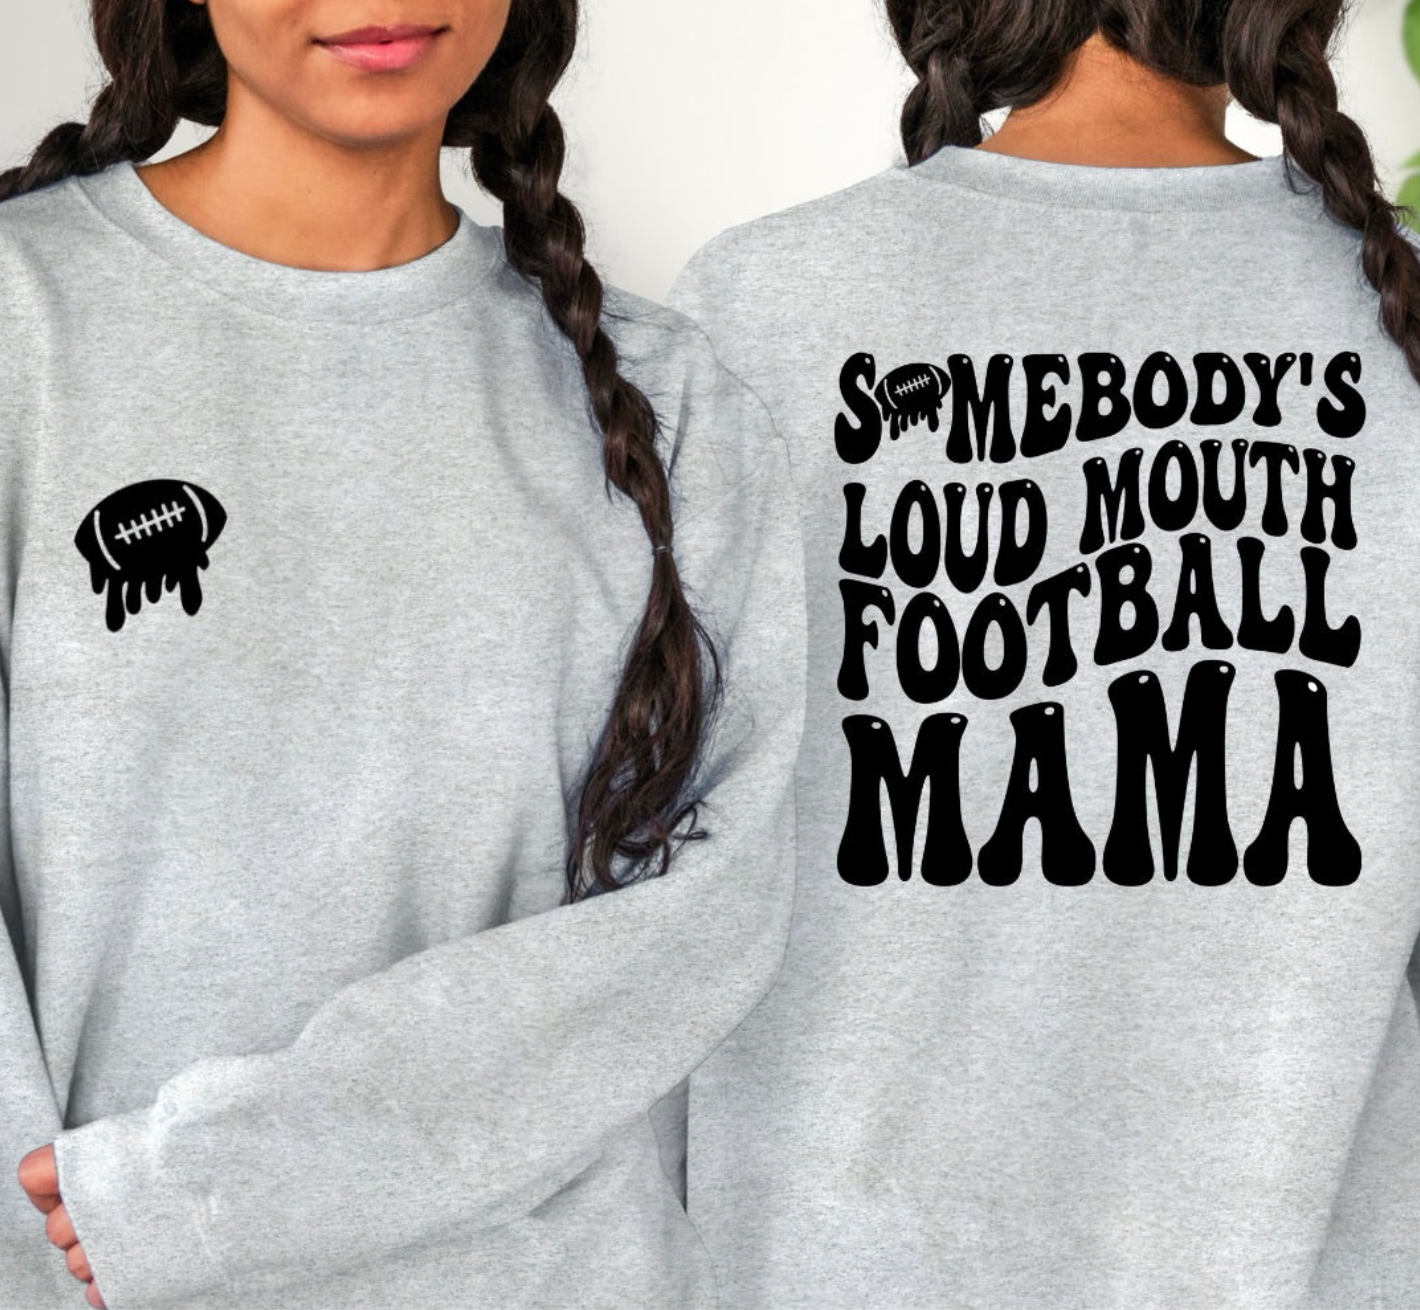 Somebody's Loud Football Mama Sweater - Prominent StylS of Sorts- PSS!